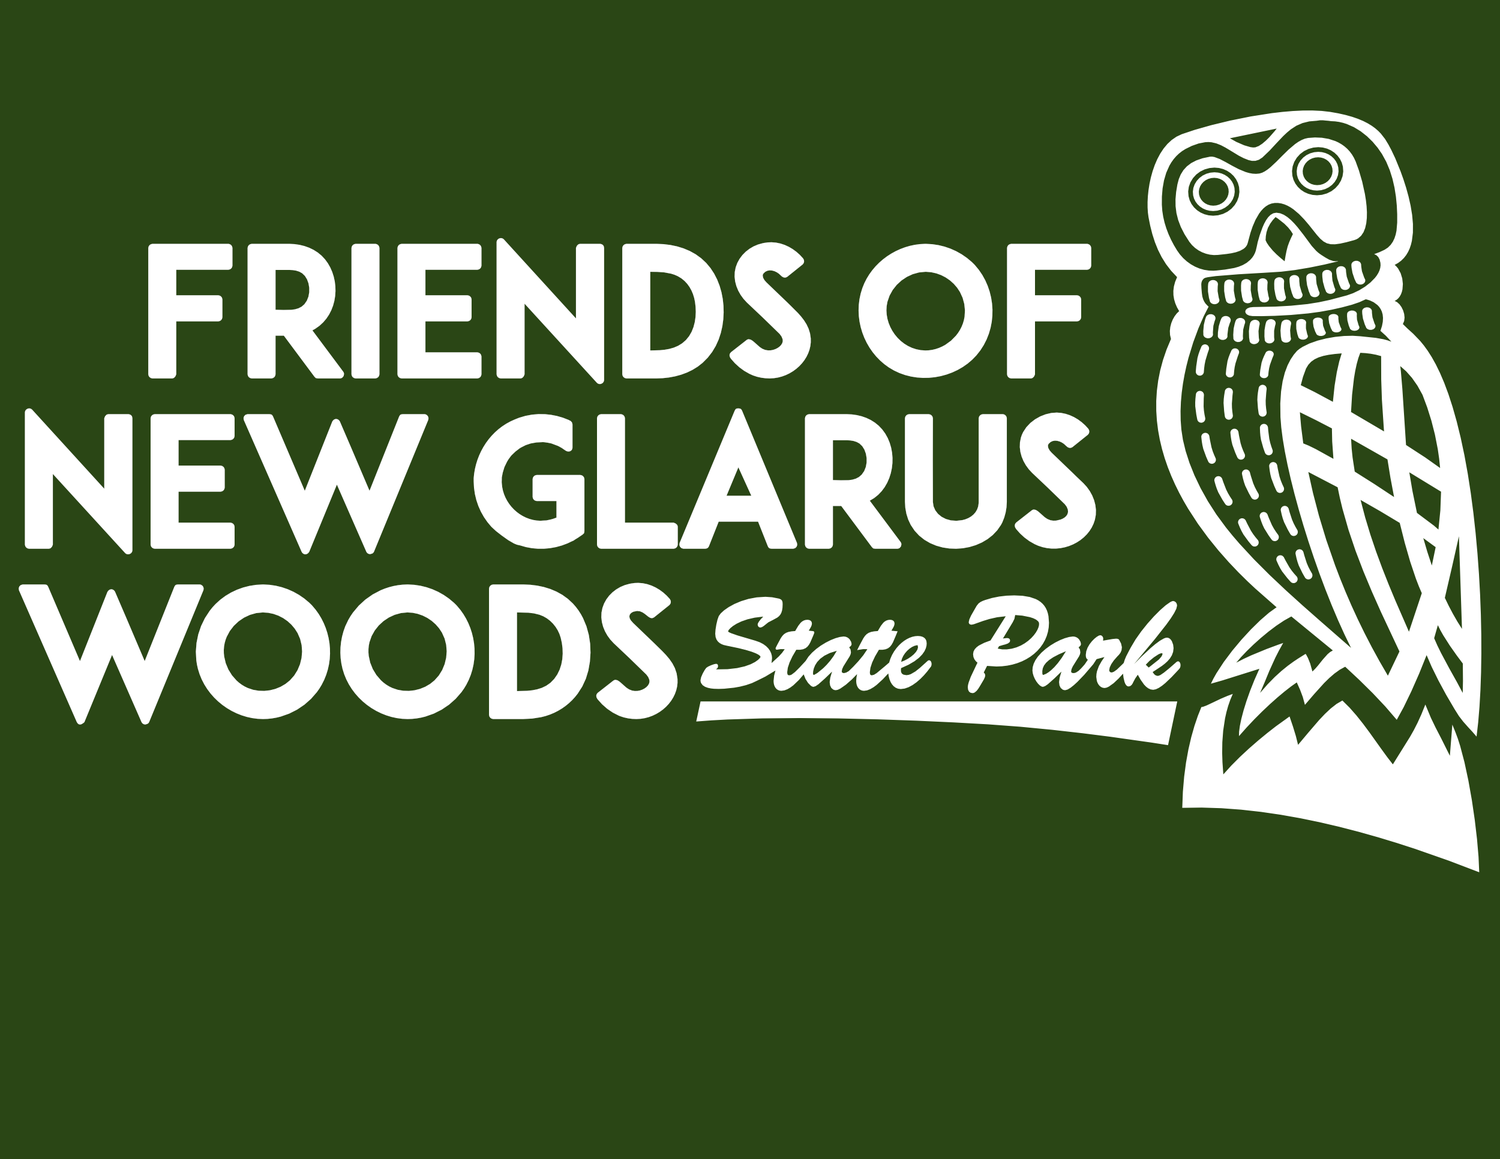 Friends of the New Glarus Woods State Park